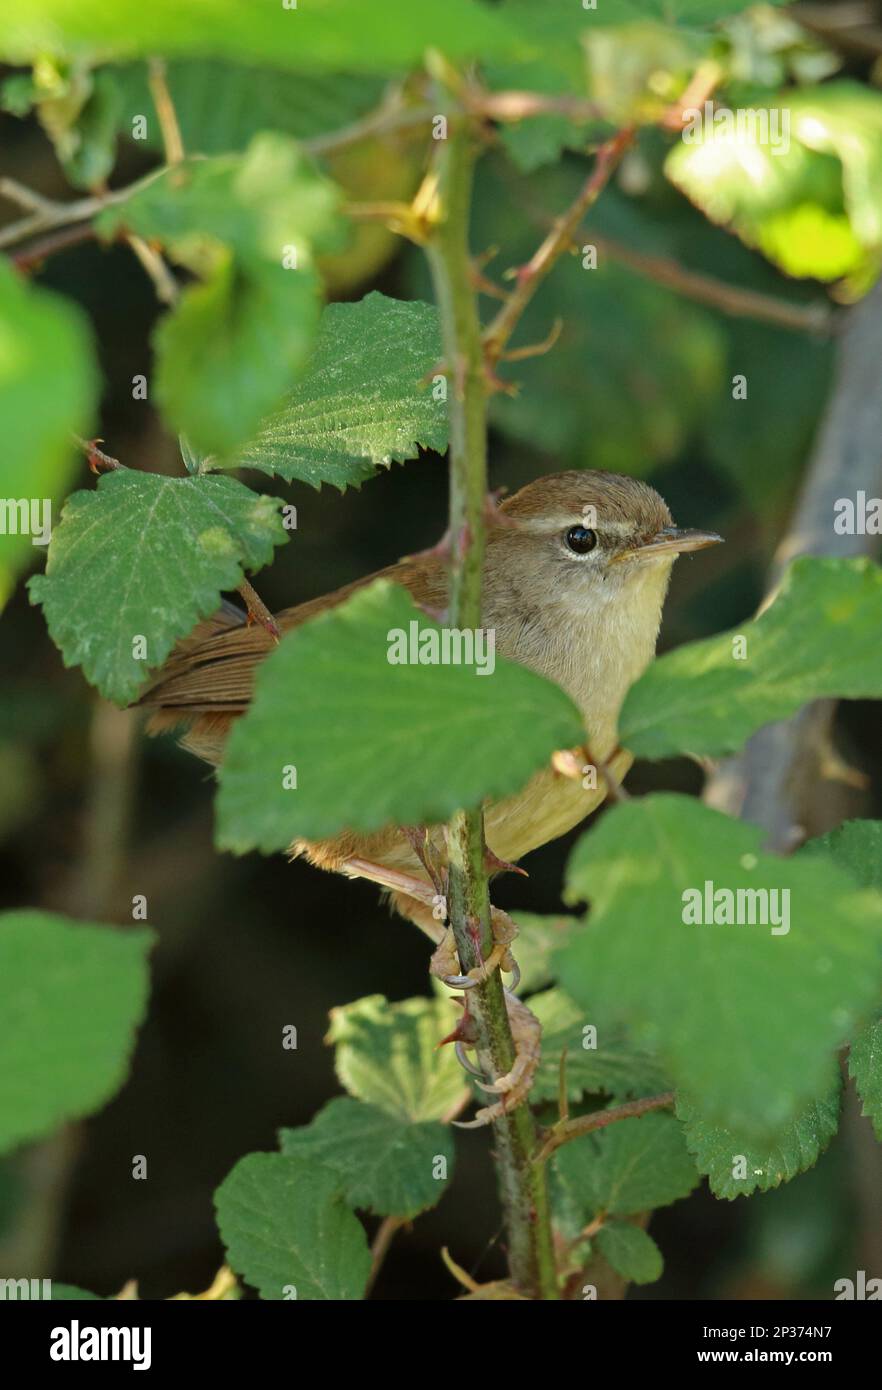 Cetti's Warbler (Cettia cetti) adult, perched on thorny stem amongst leaves, Coto Donana, Andalucia, Spain Stock Photo